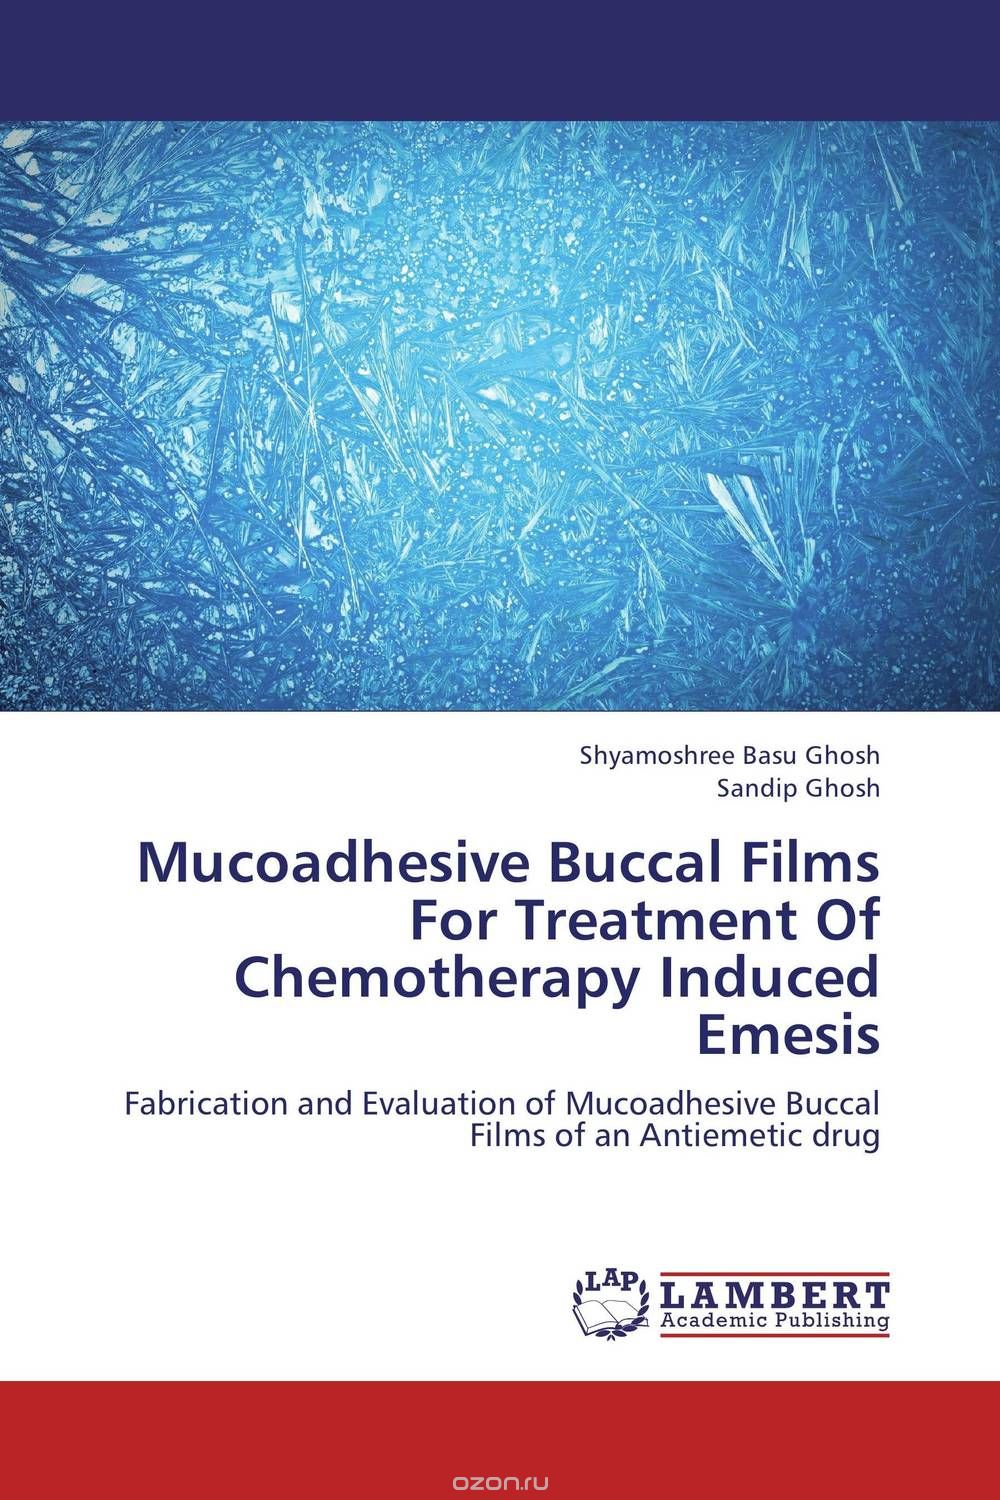 Скачать книгу "Mucoadhesive Buccal Films For Treatment Of Chemotherapy Induced Emesis"